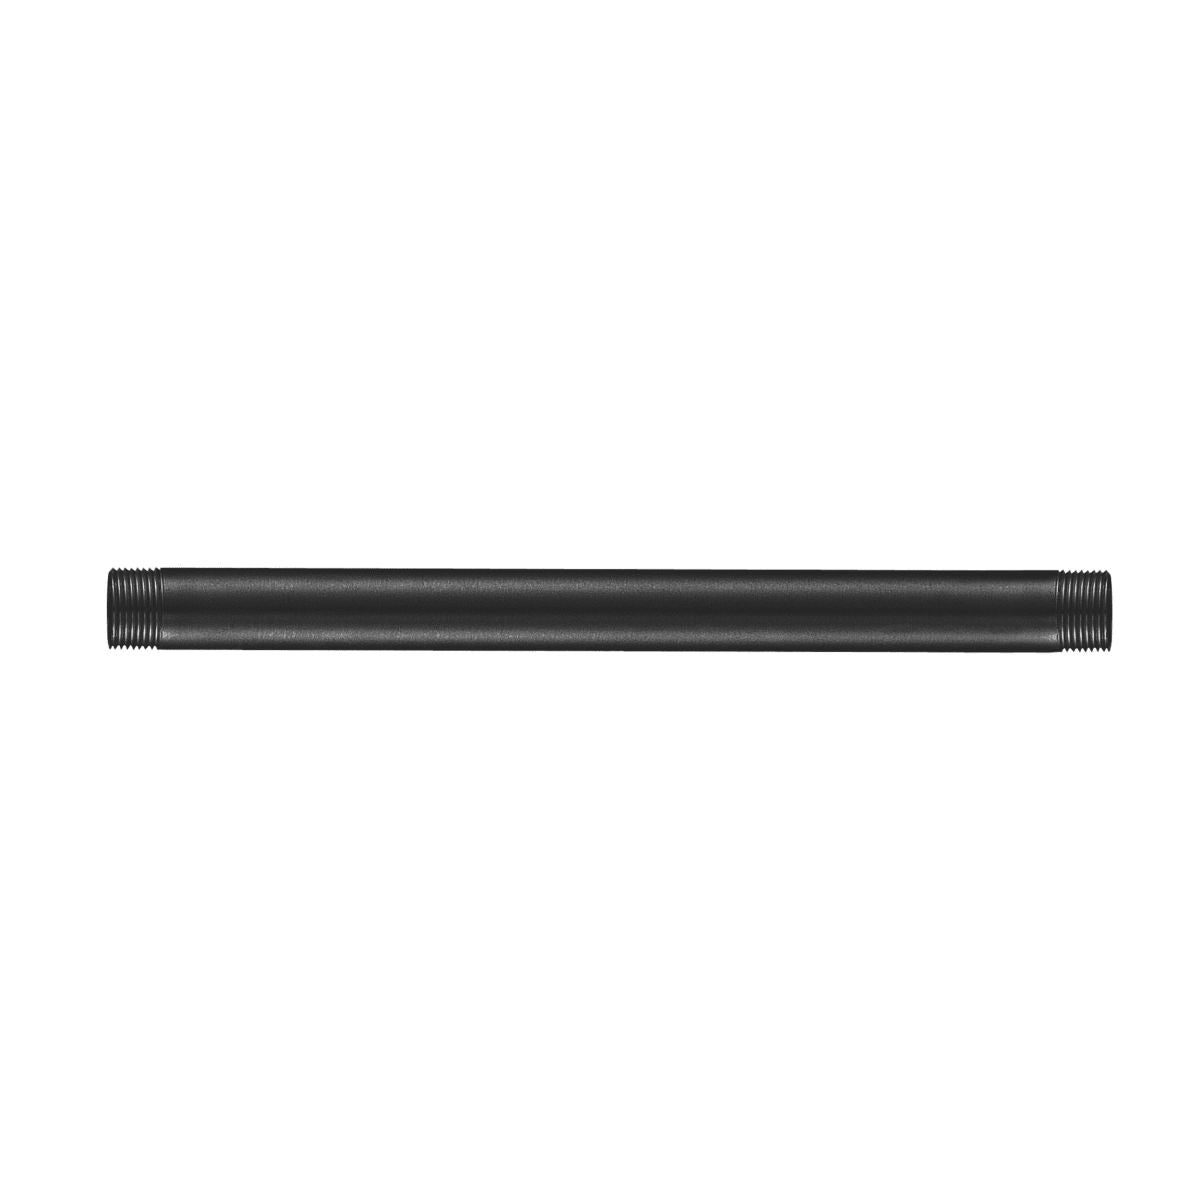 R series 12 In. Long Architectural Straight Stem